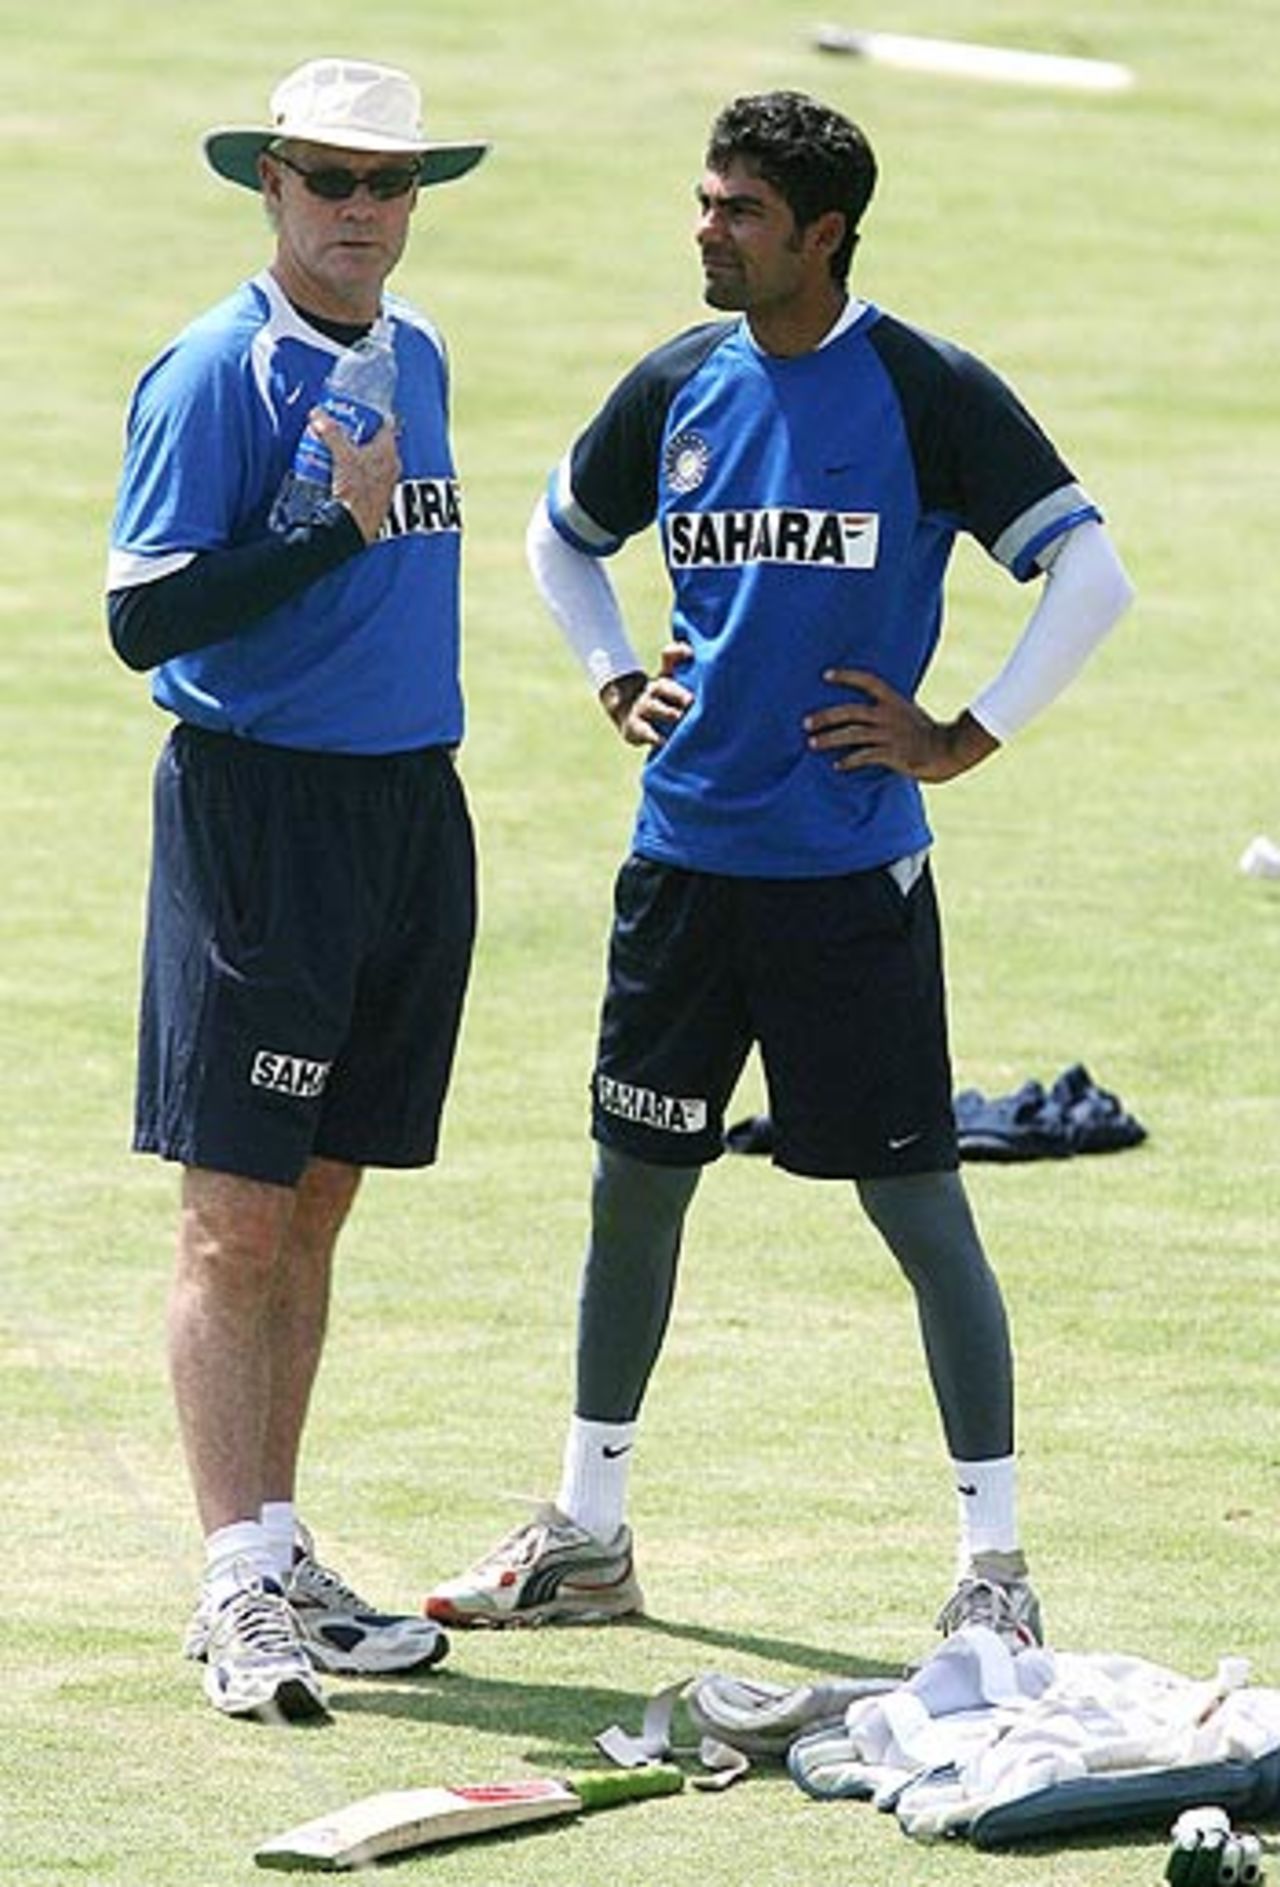 Greg Chappell talks to Mohammad Kaif before the final ODI against England, India v England, 7th ODI, Indore, April 14, 2006